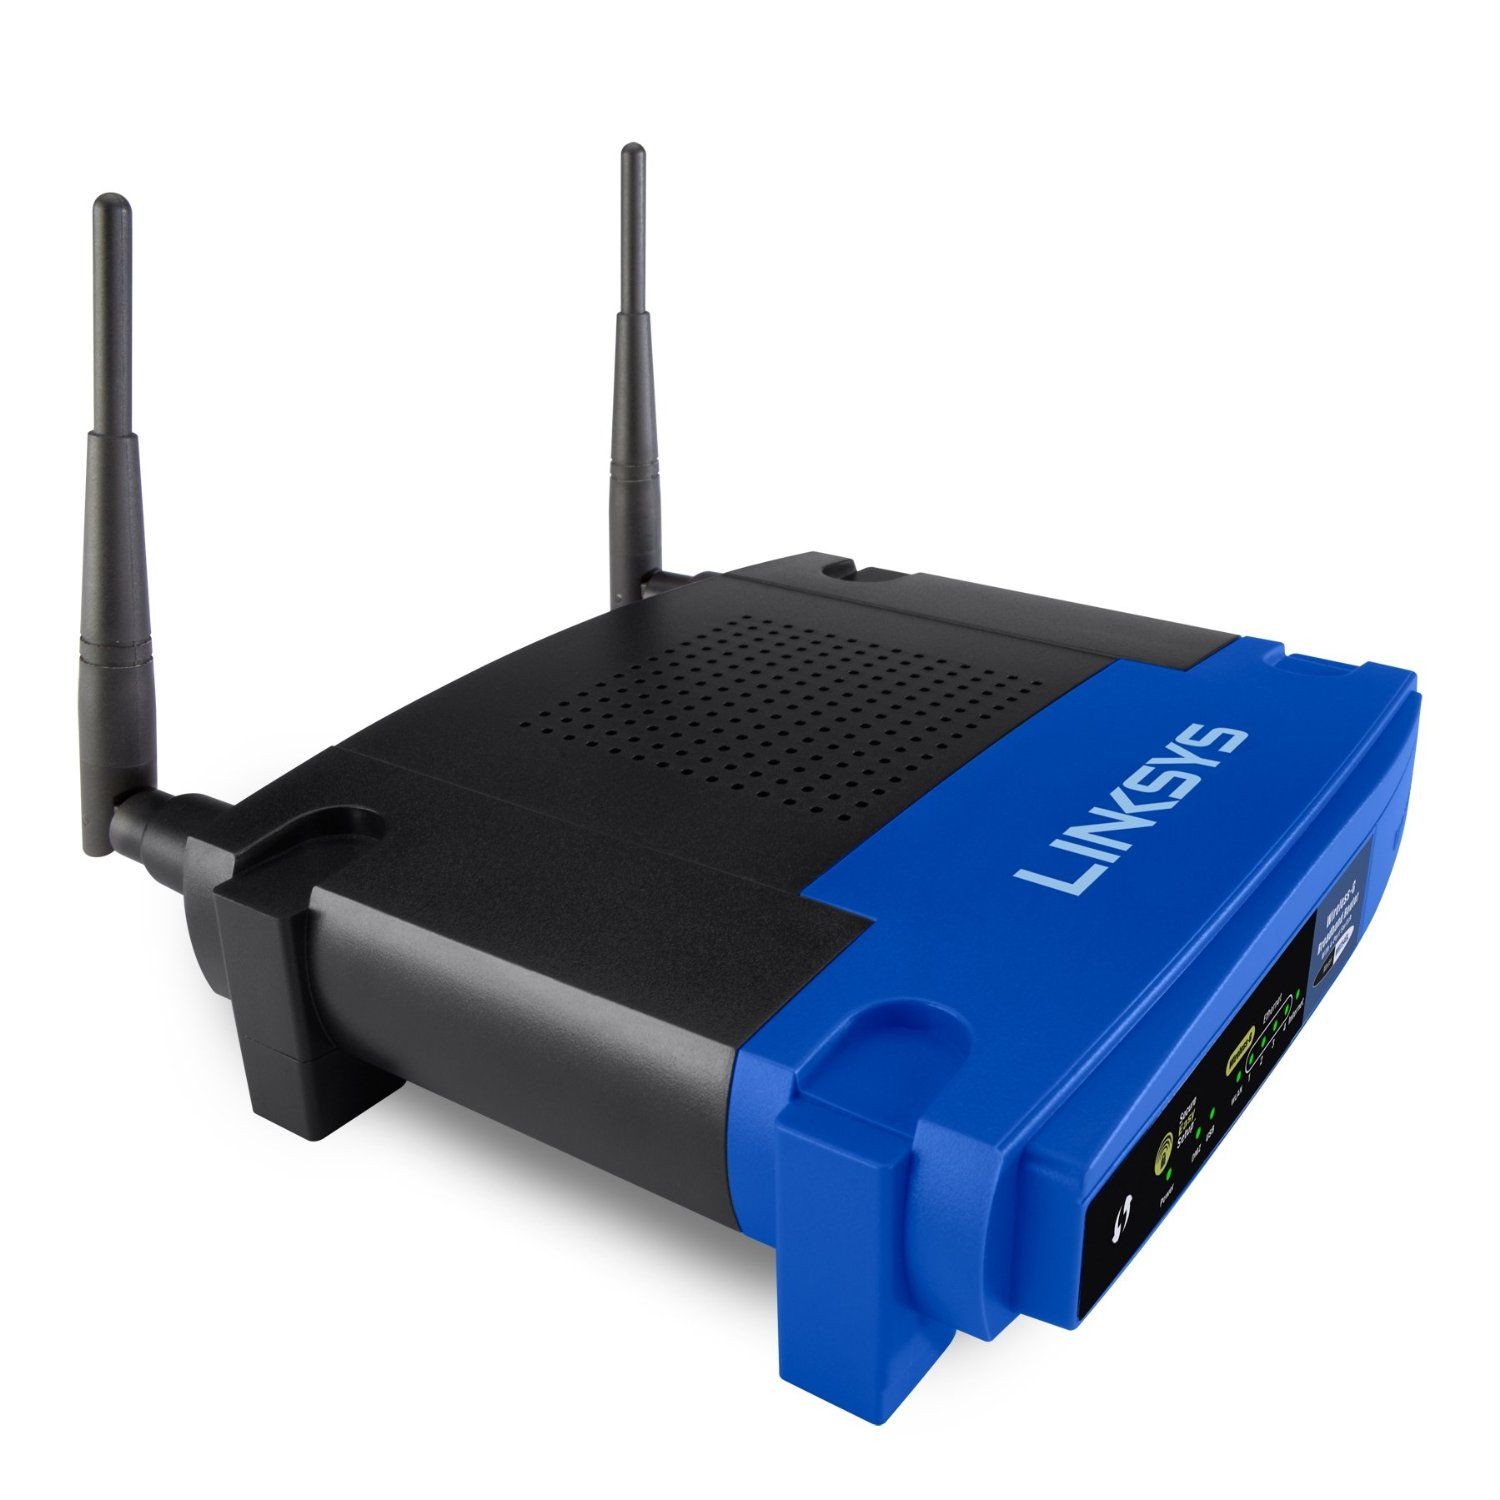 Linksys Router (Photo 72 of 7825)